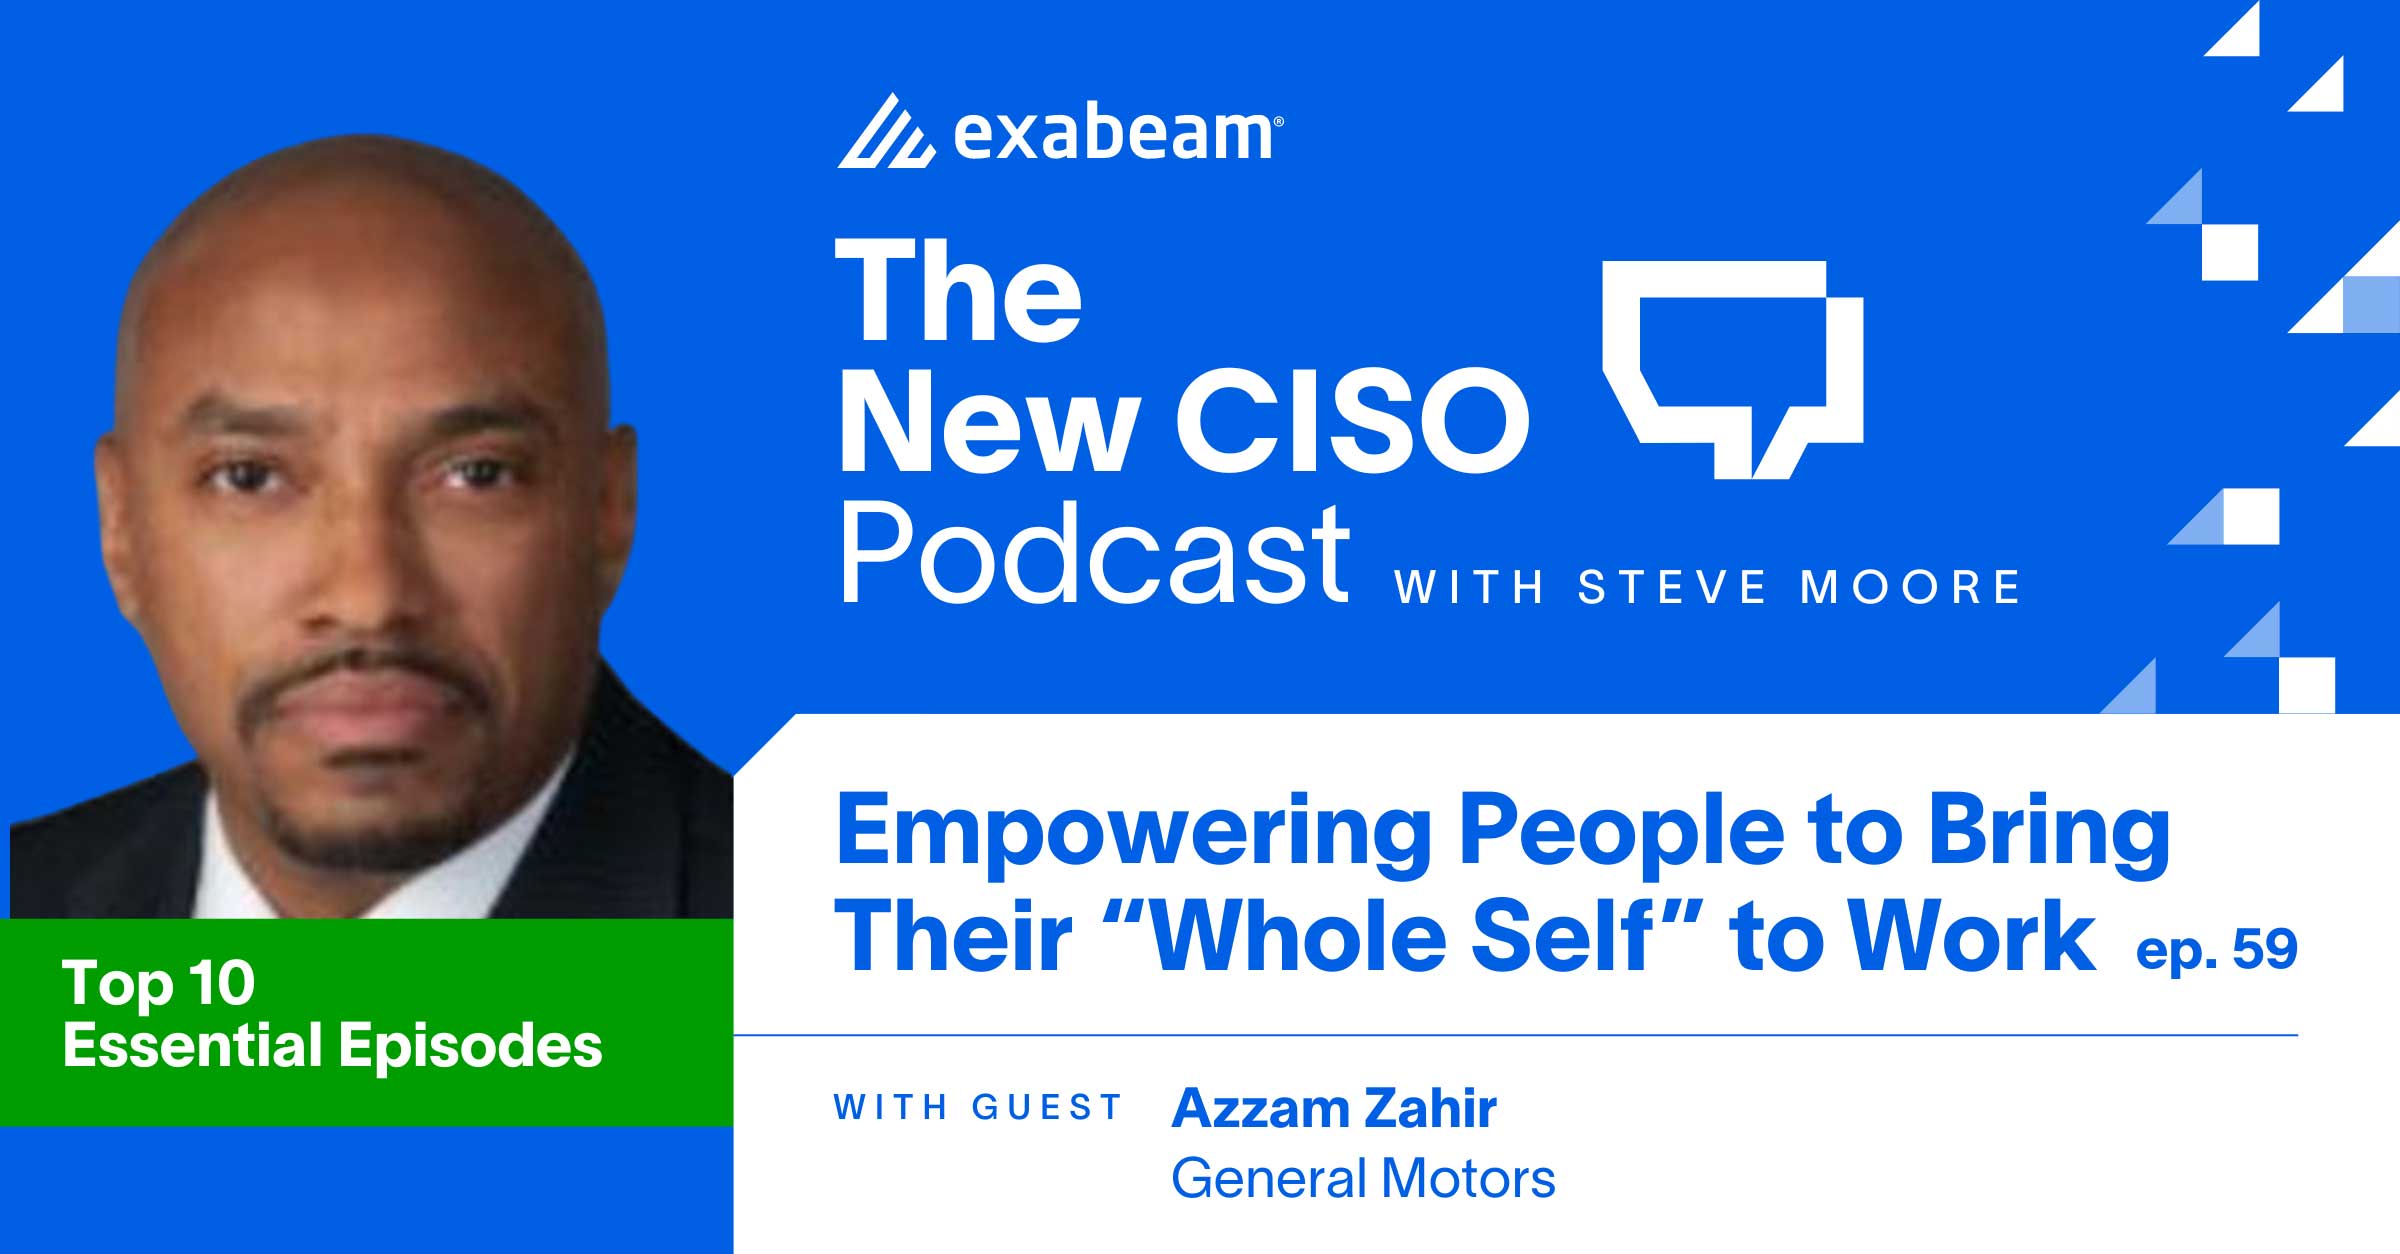 Empowering People to Bring Their “Whole Self” to Work